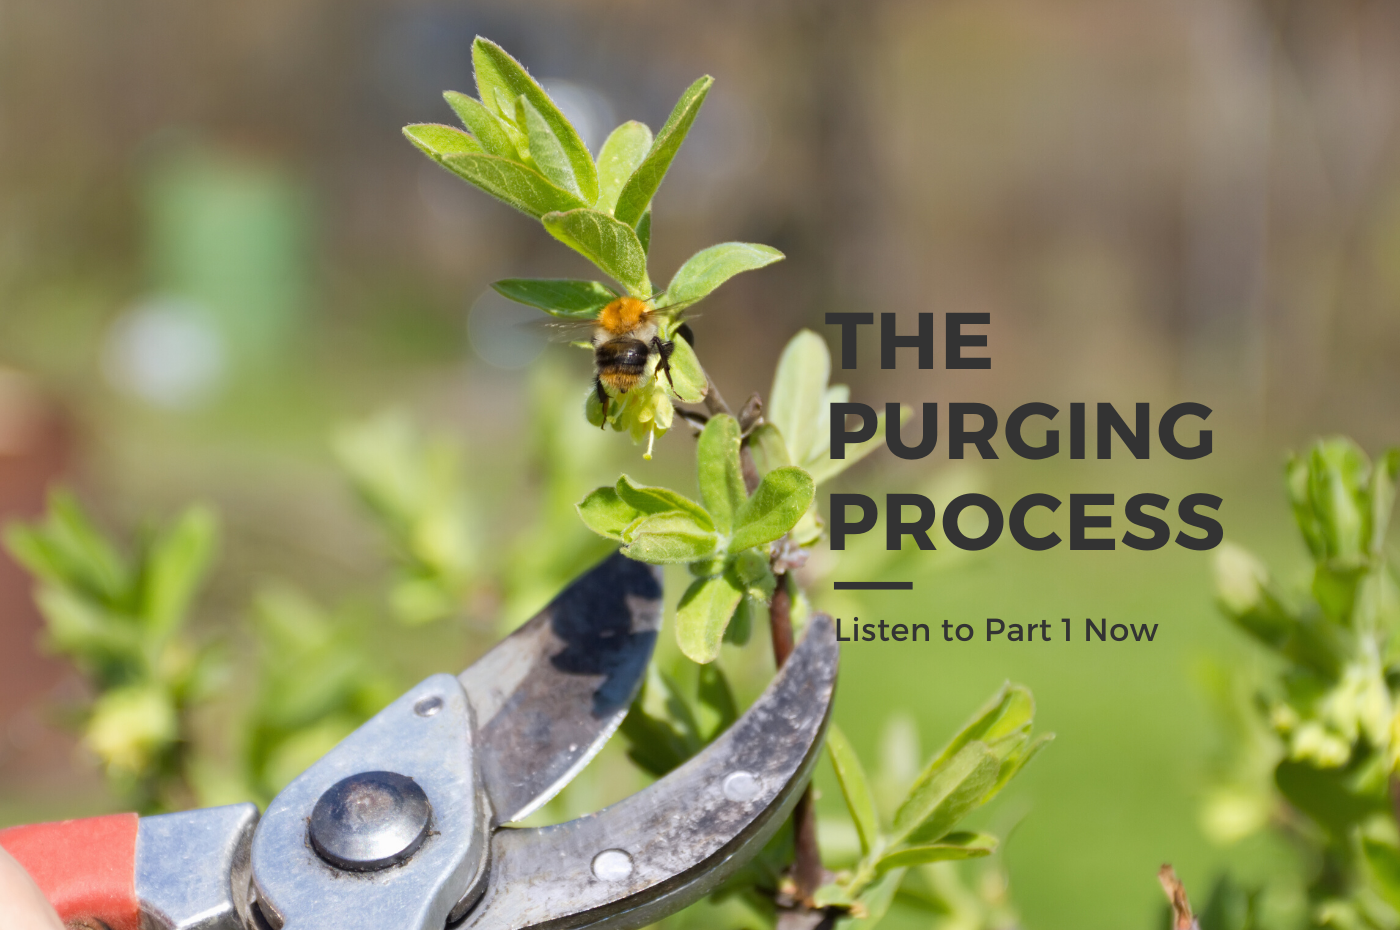 The Purging Process